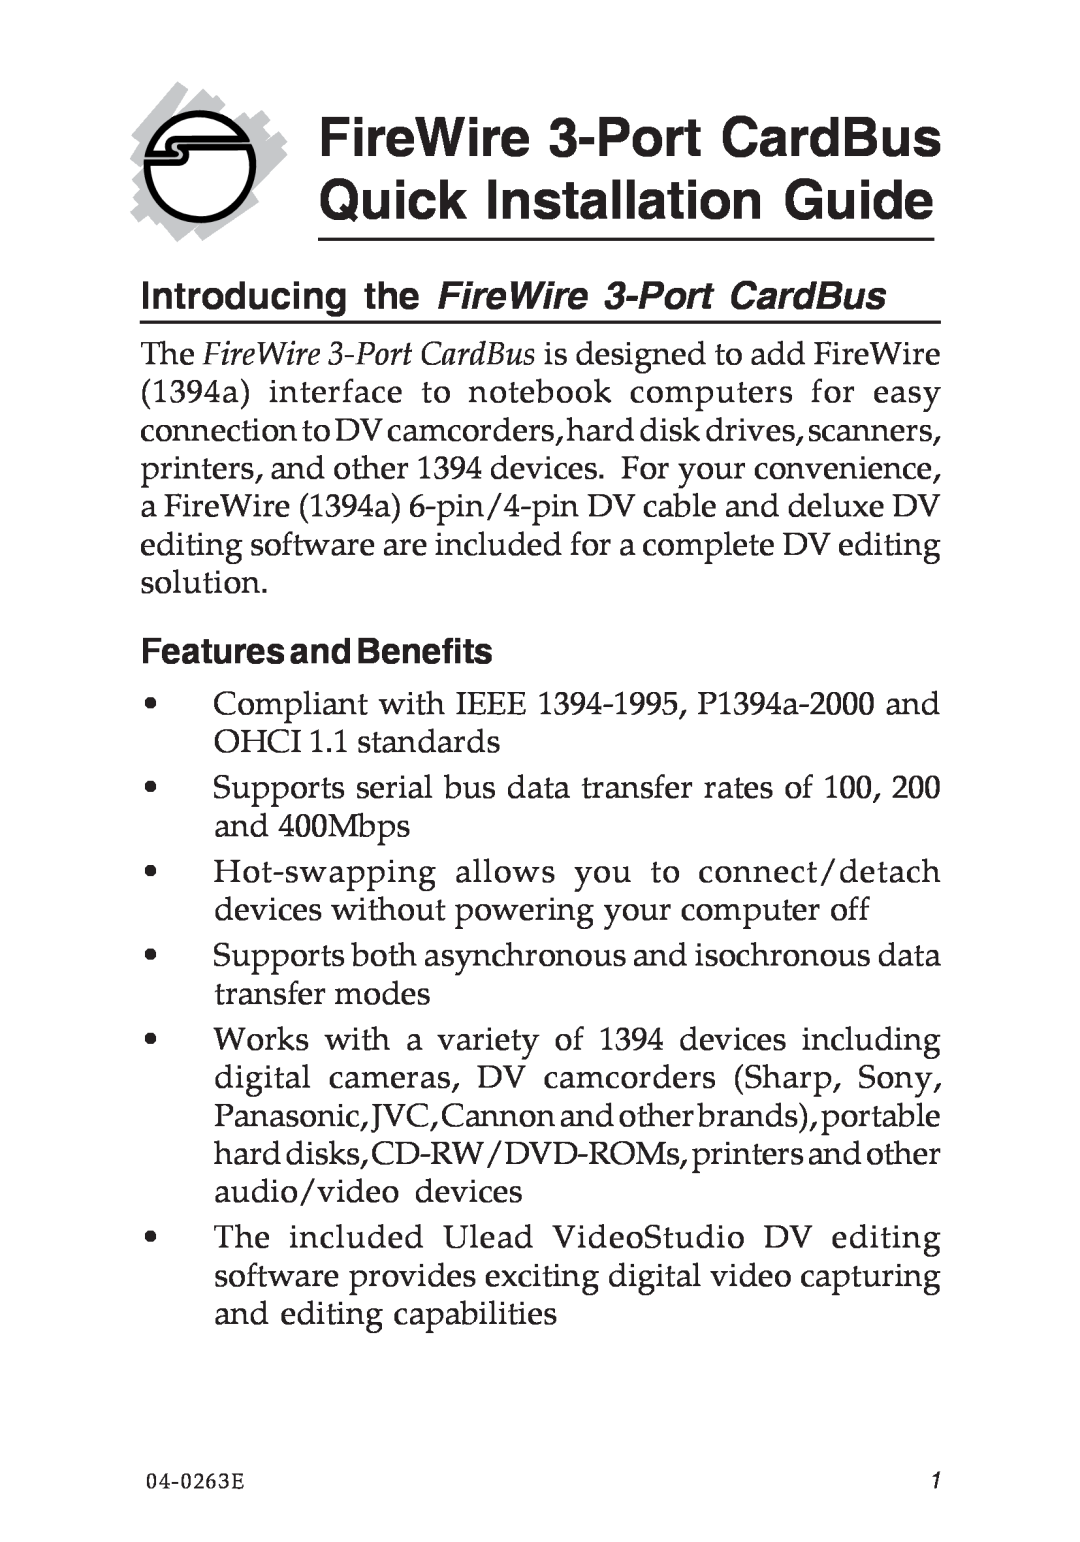 SIIG 04-0263E manual Features and Benefits, FireWire 3-Port CardBus Quick Installation Guide 